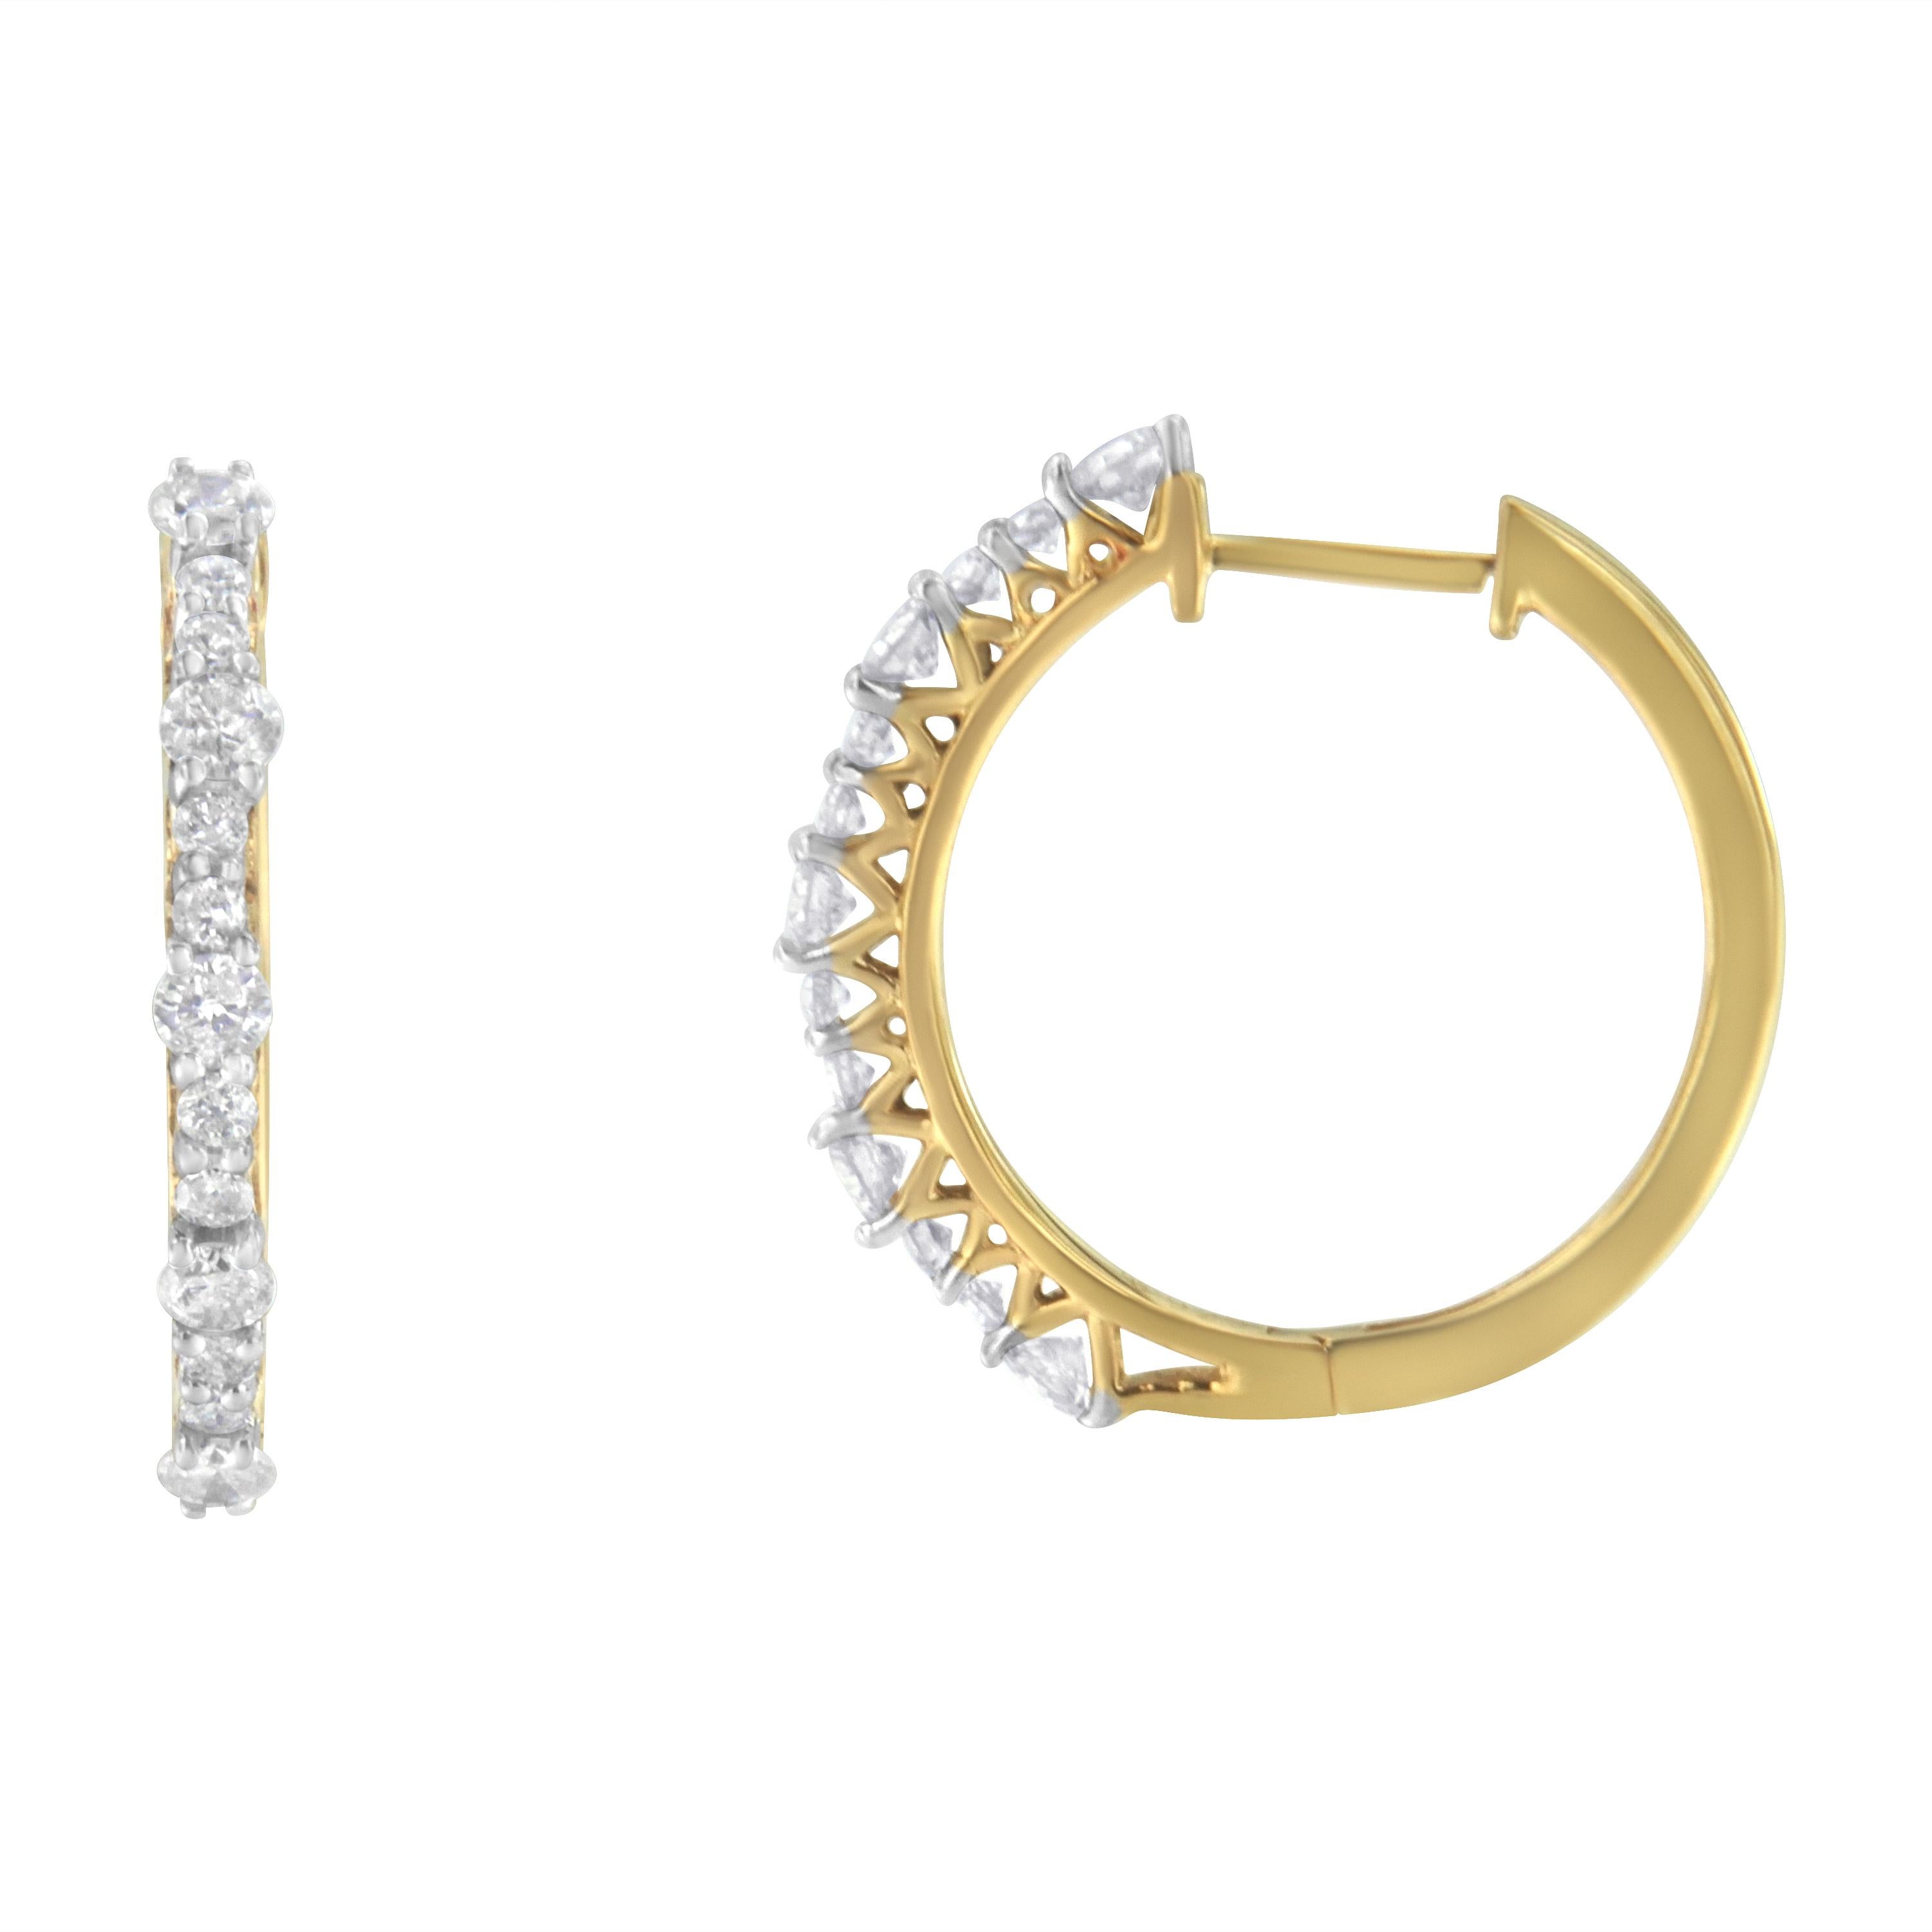 An elegant pair of diamond hoop earrings featuring diamonds of graduated size set into yellow gold plated sterling silver hoops. A classic design for a special occasion. They have a total diamond weight of 1 carat. The base metal is sterling silver